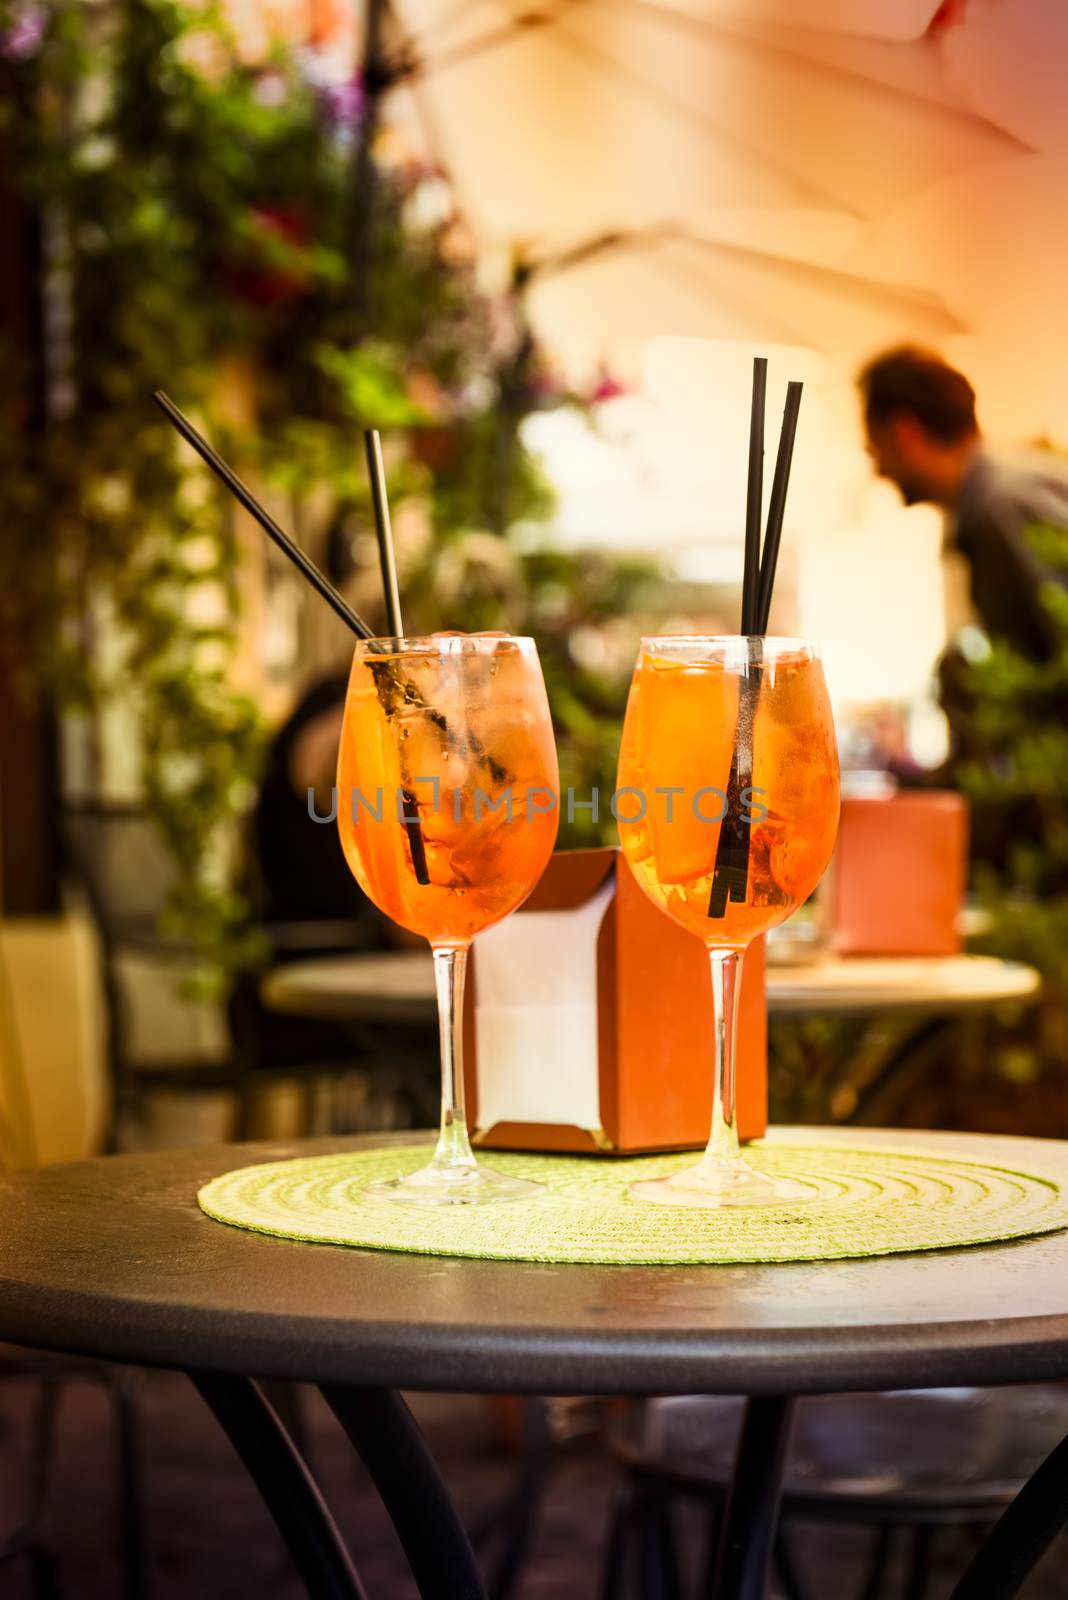 Aperol Spritz Cocktail. Alcoholic beverage based on table with ice cubes and oranges.